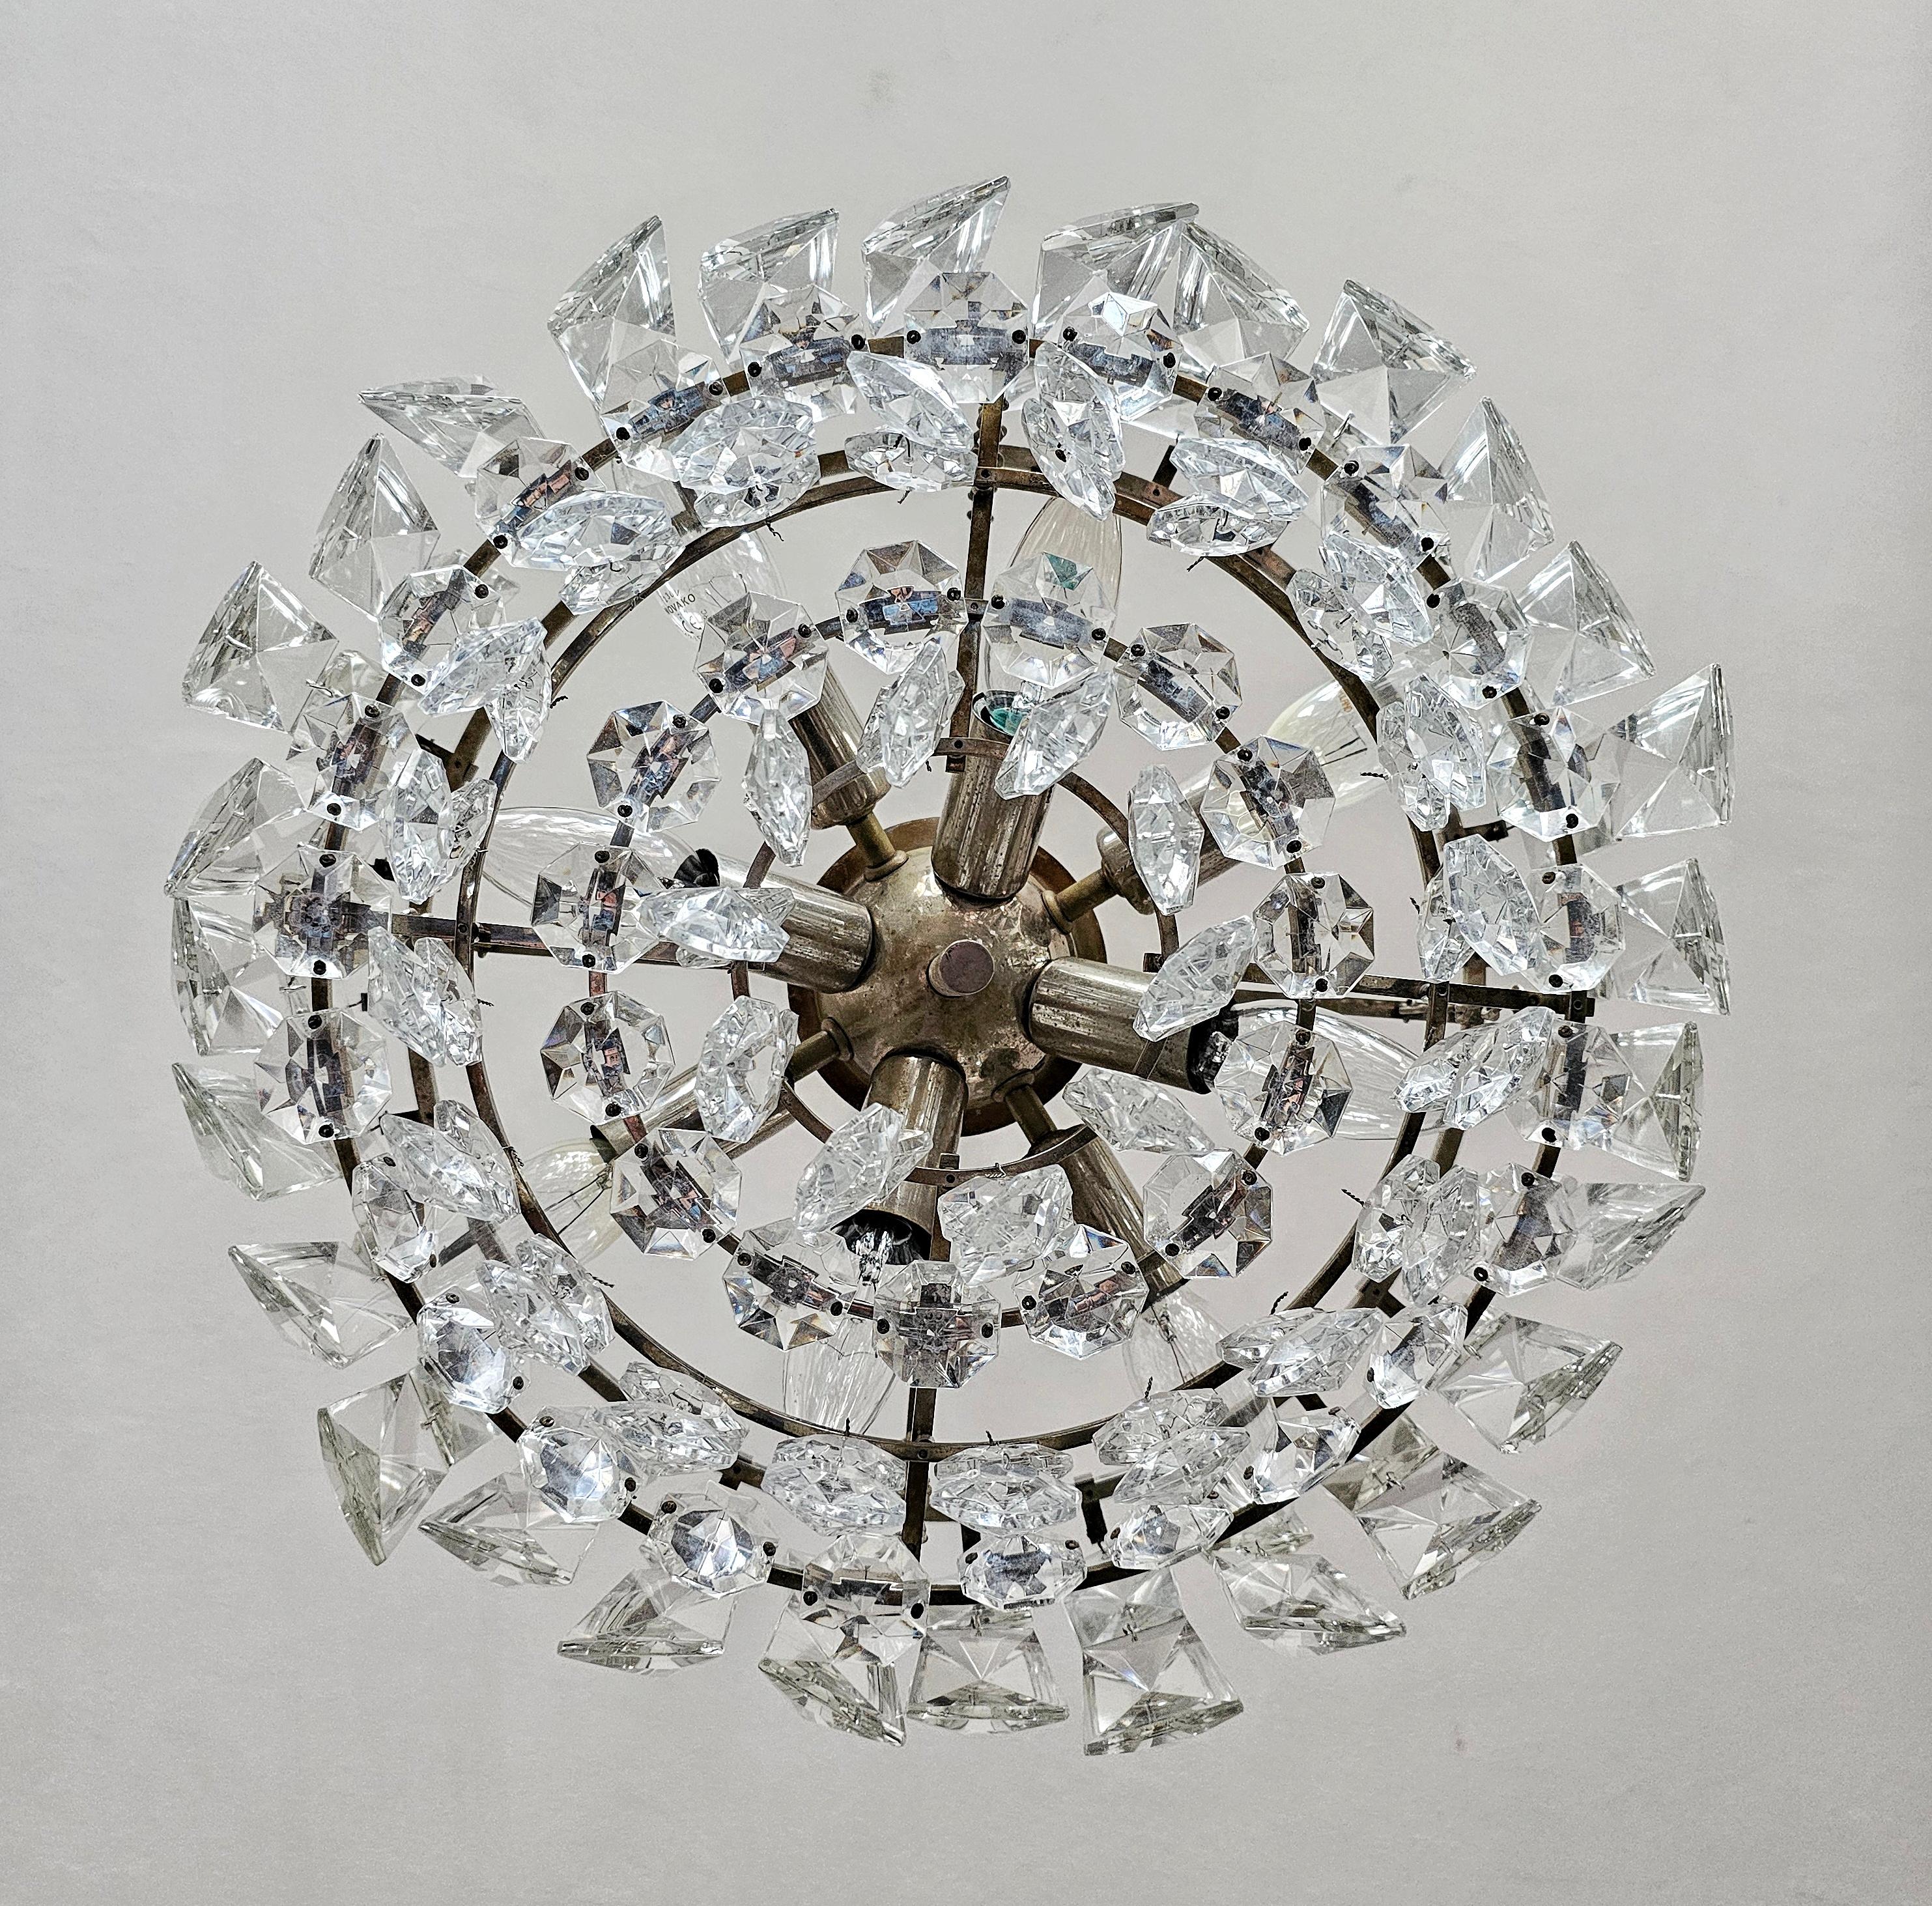 Mid Century Modern Nickel Plated Crystal Chandelier by Bakalowits, Austria 1960s For Sale 4